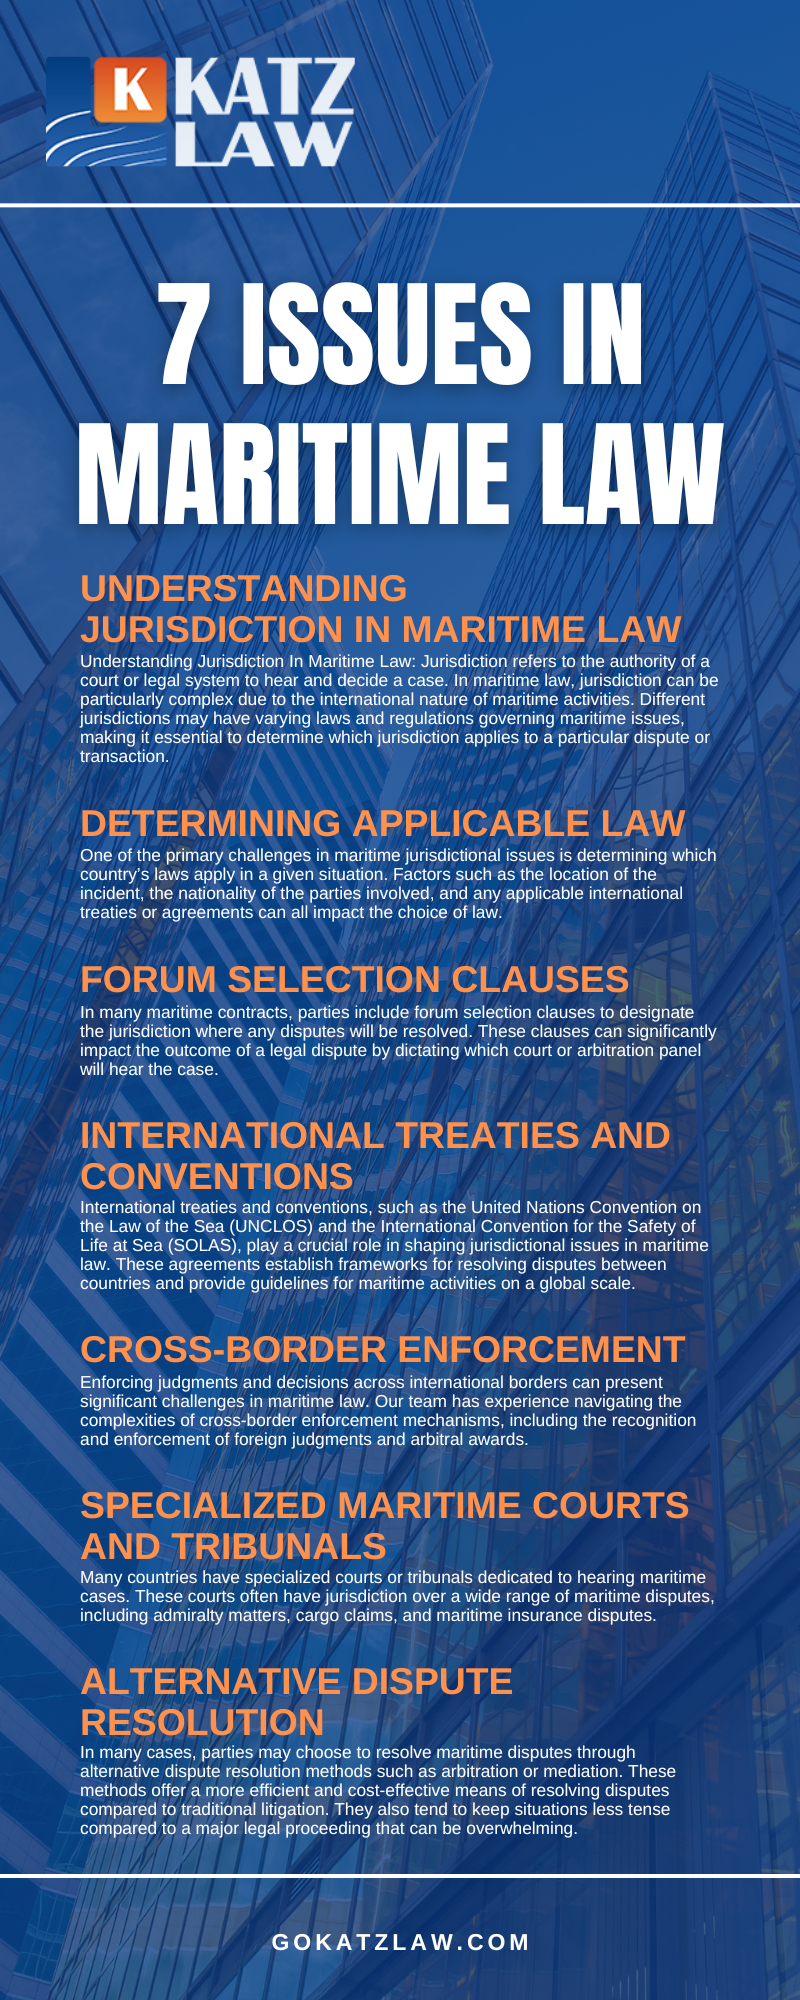 7 Issues In Maritime Law Infographic